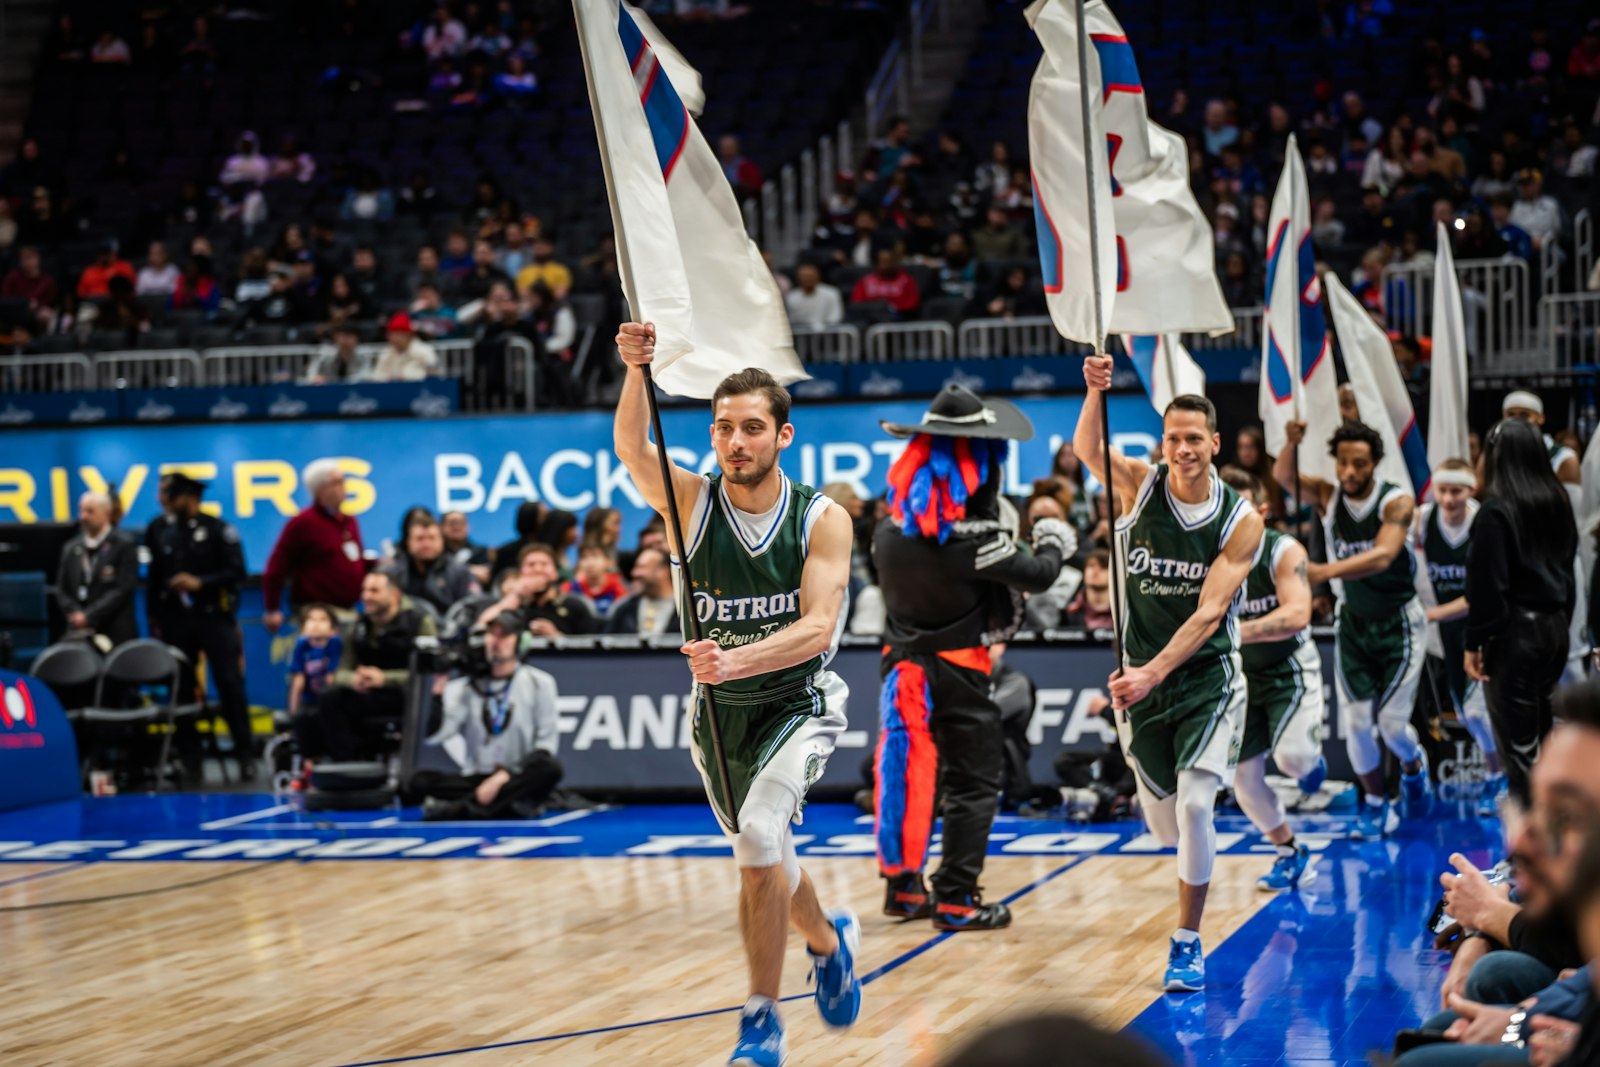 The Detroit Pistons' "Extreme Team" runs out onto the court before the Pistons and Wizards tip off March 7. This season, the Detroit Pistons are wearing green "City Edition" uniforms for select games, inspired by Ceciliaville.